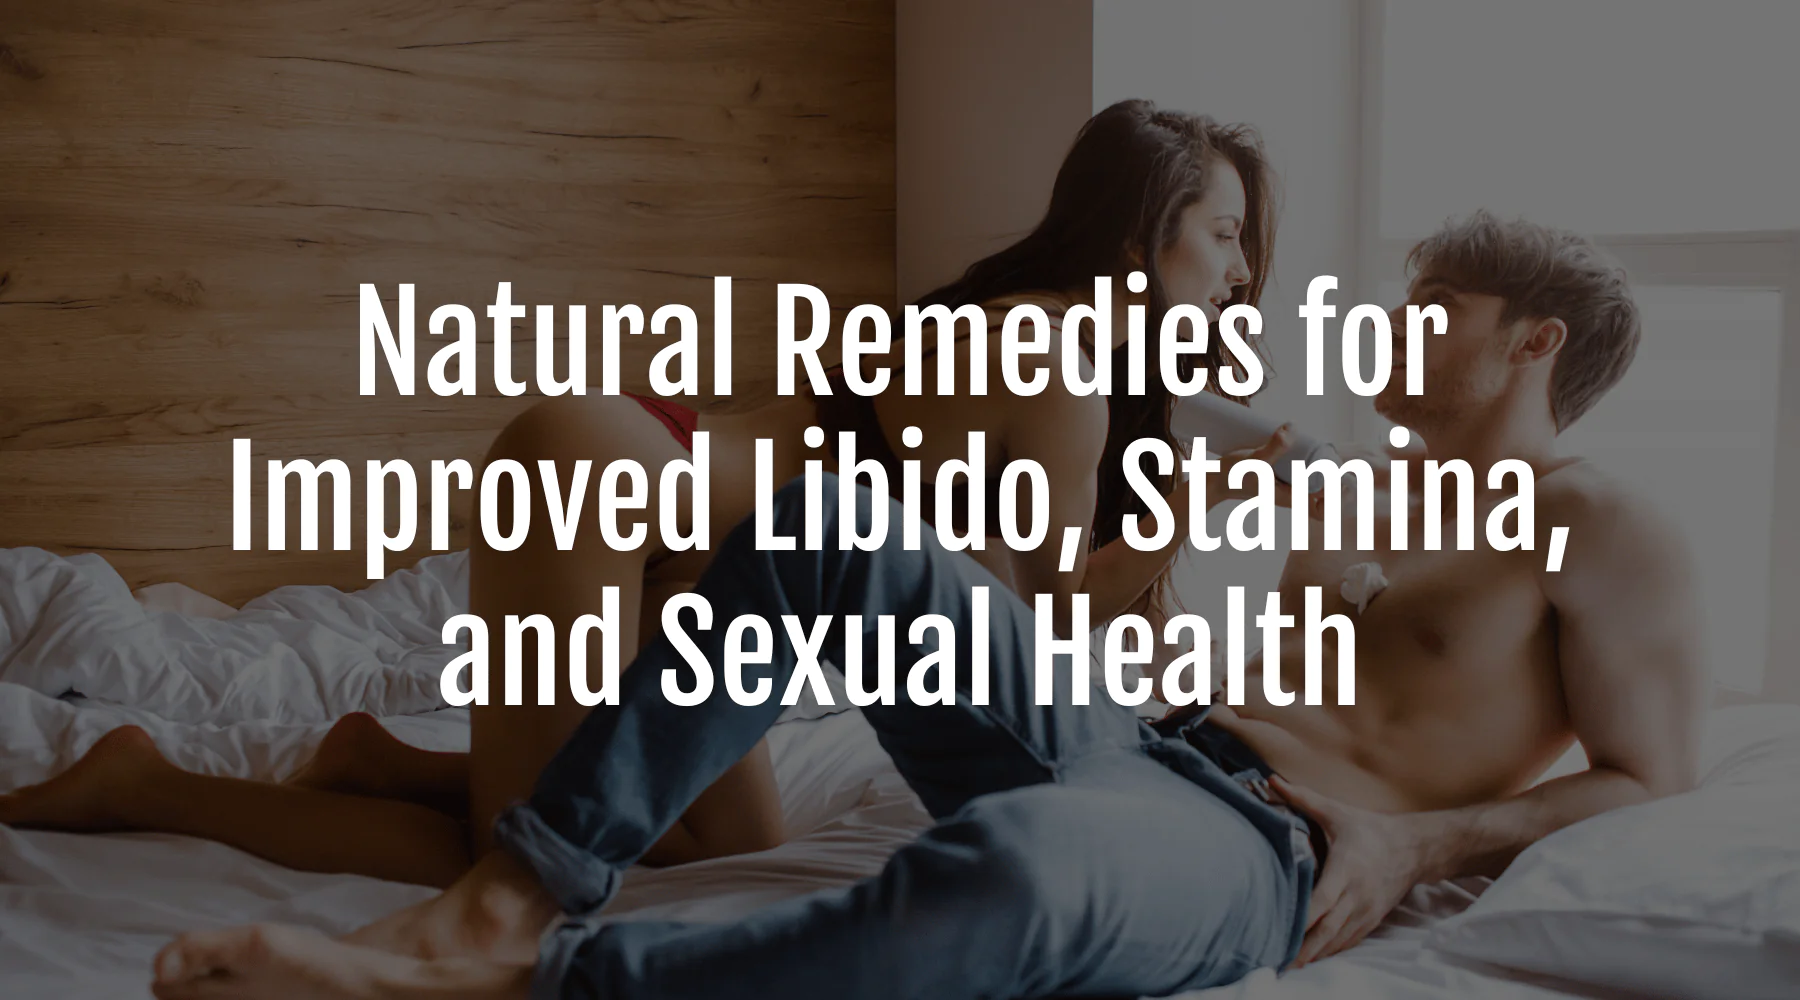 Natural Remedies For Improved Libido, Stamina, And Sexual Health